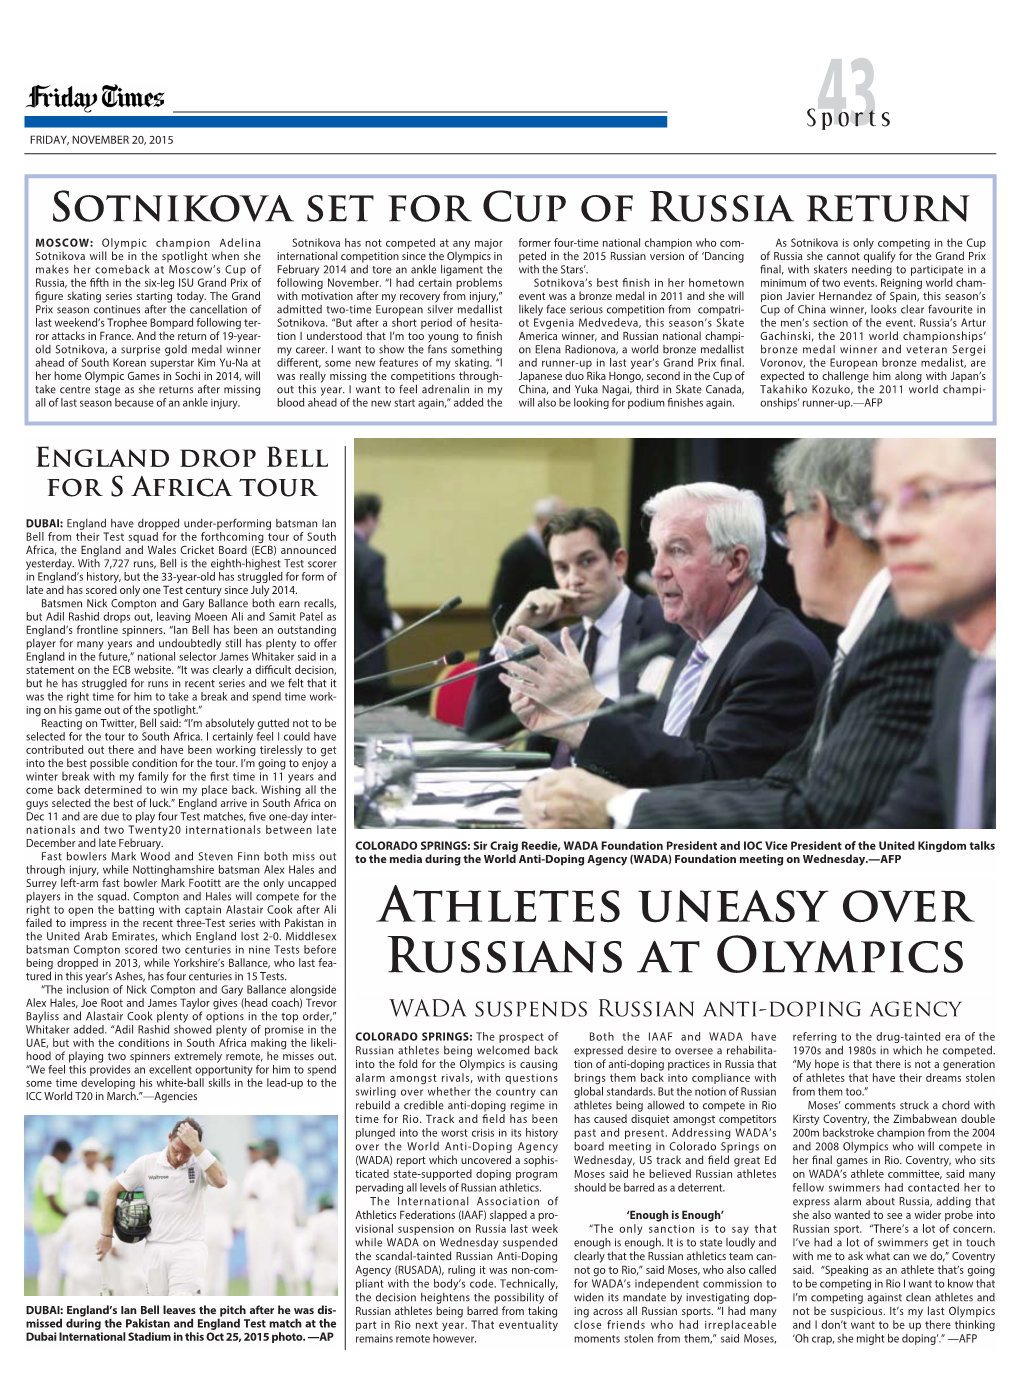 Athletes Uneasy Over Russians at Olympics